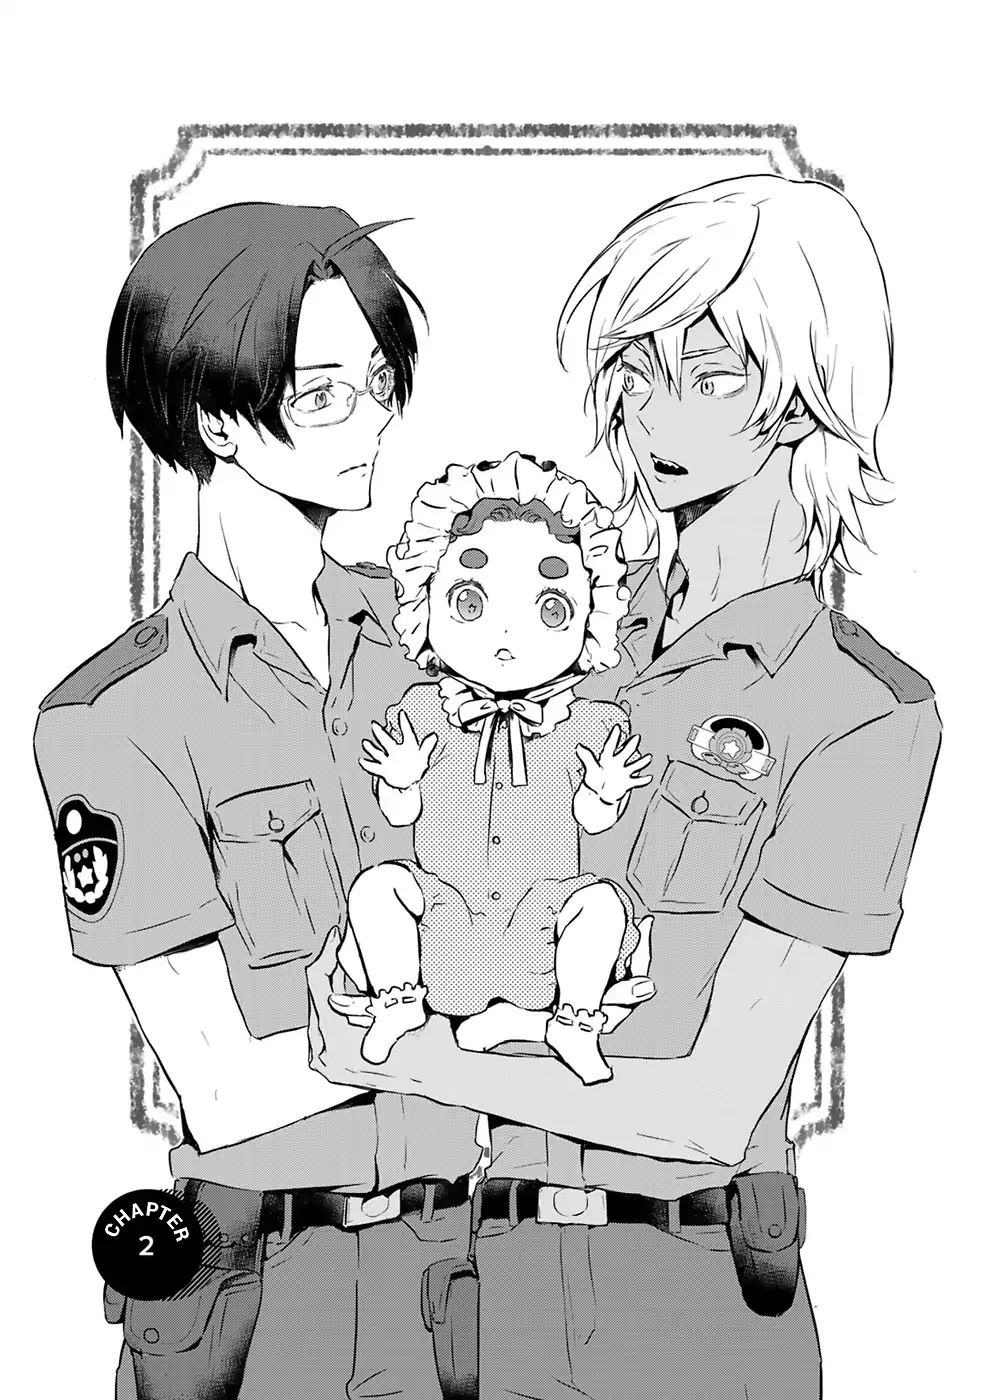 Reo and Mabu ~Together They're Sarazanmai~ - chapter 2 - #1